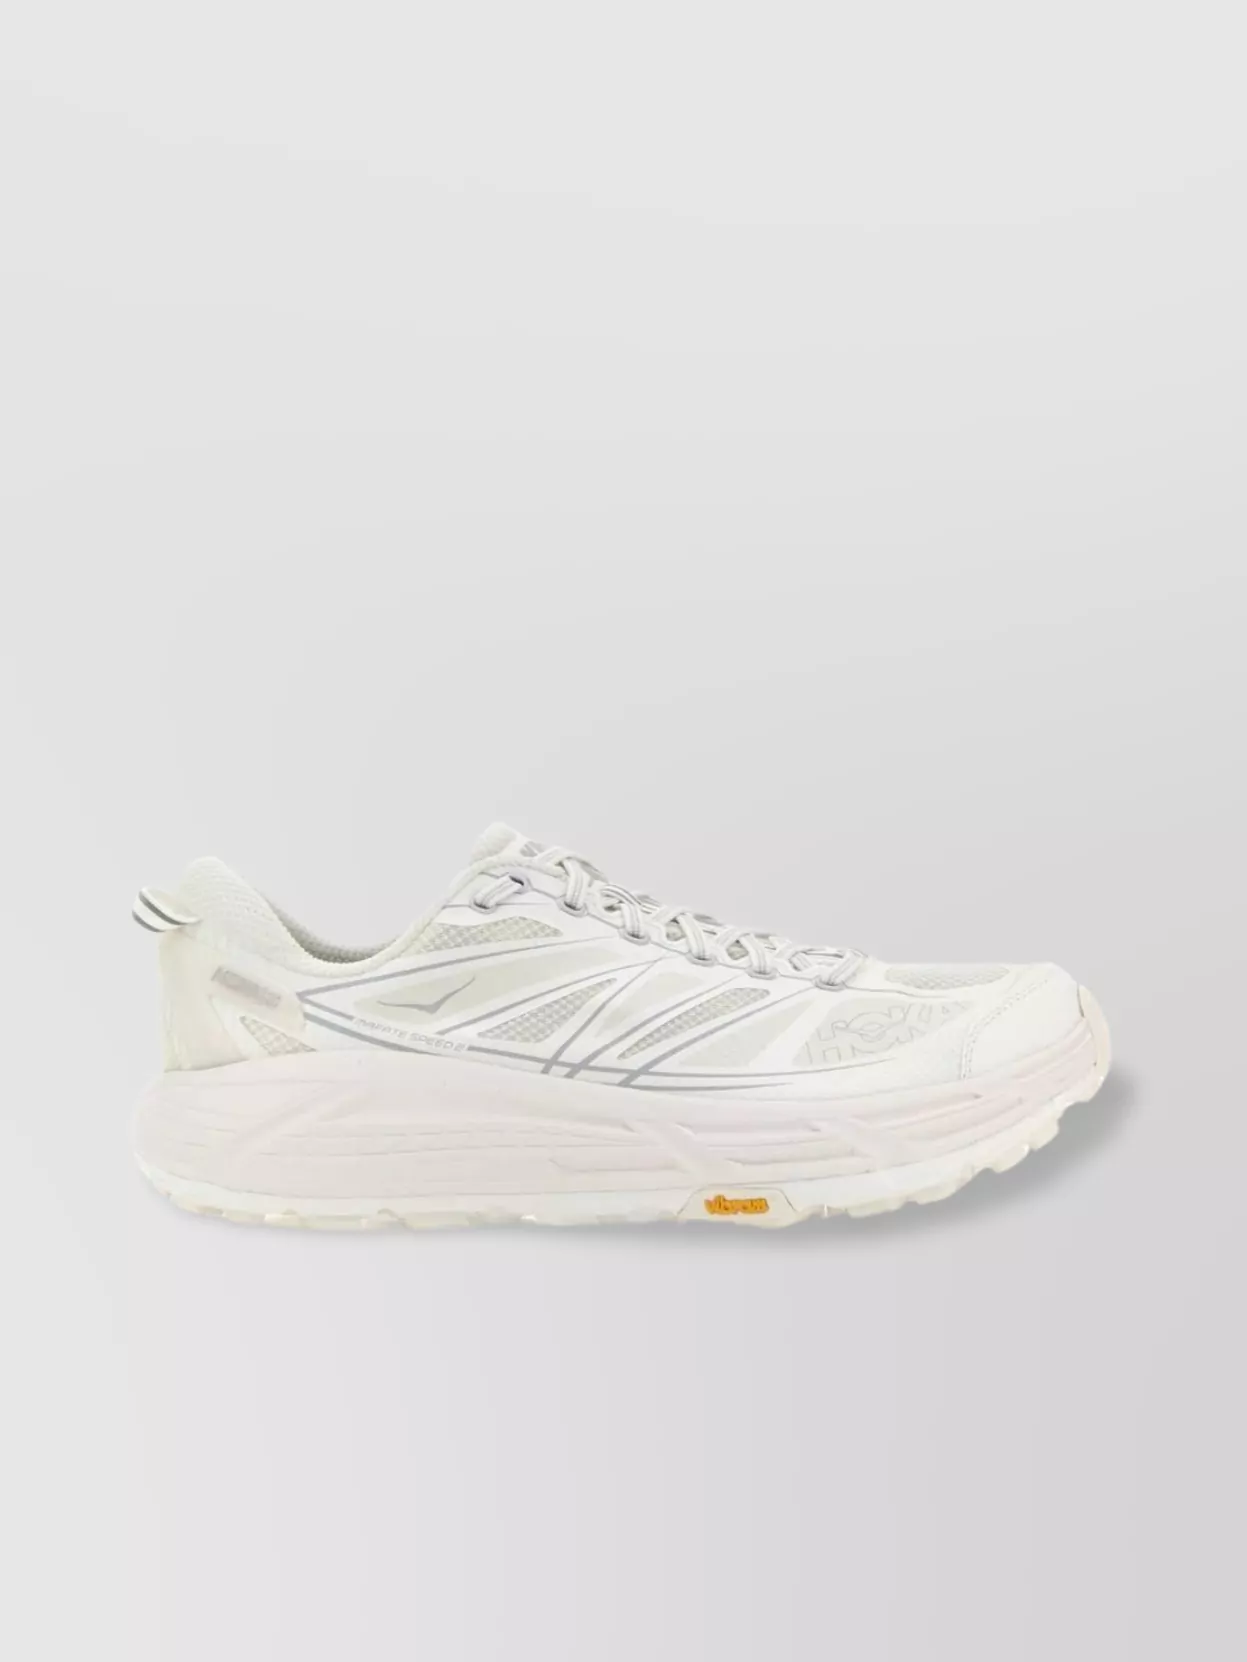 Hoka One One Fabric And Rubber Chunky Sole Sneakers In White